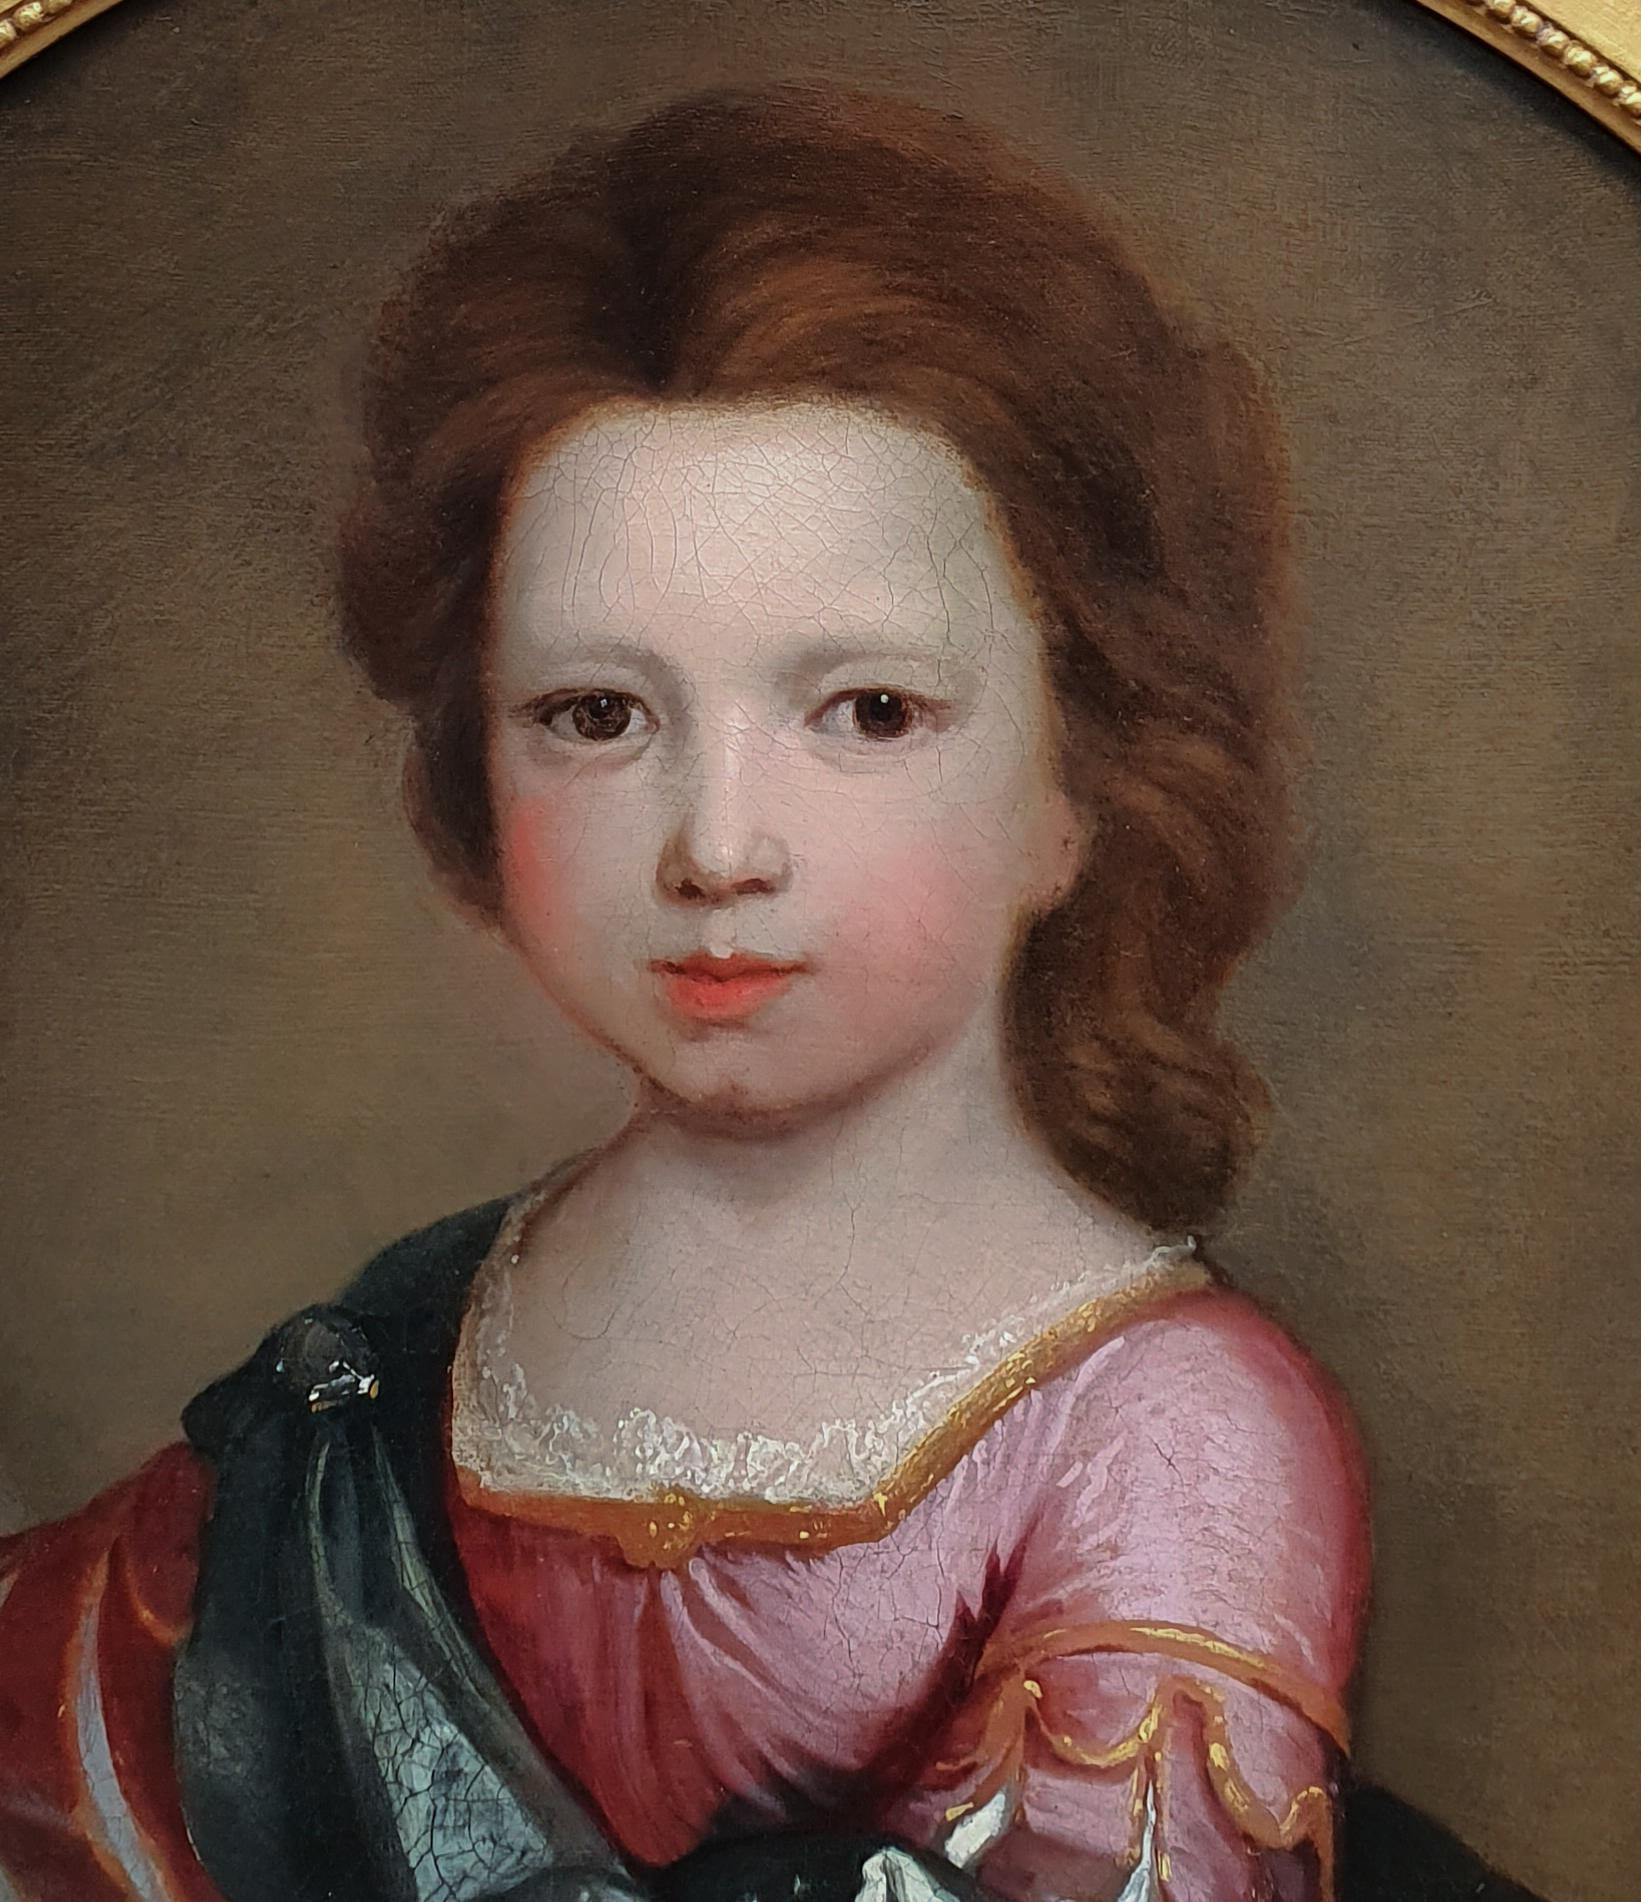 Portrait of a young girl in Roman costume c.1695, Antique Oil Painting
Attributed to Edward Byng (c.1676-1753)

This charming portrait depicts a young girl dressed in 